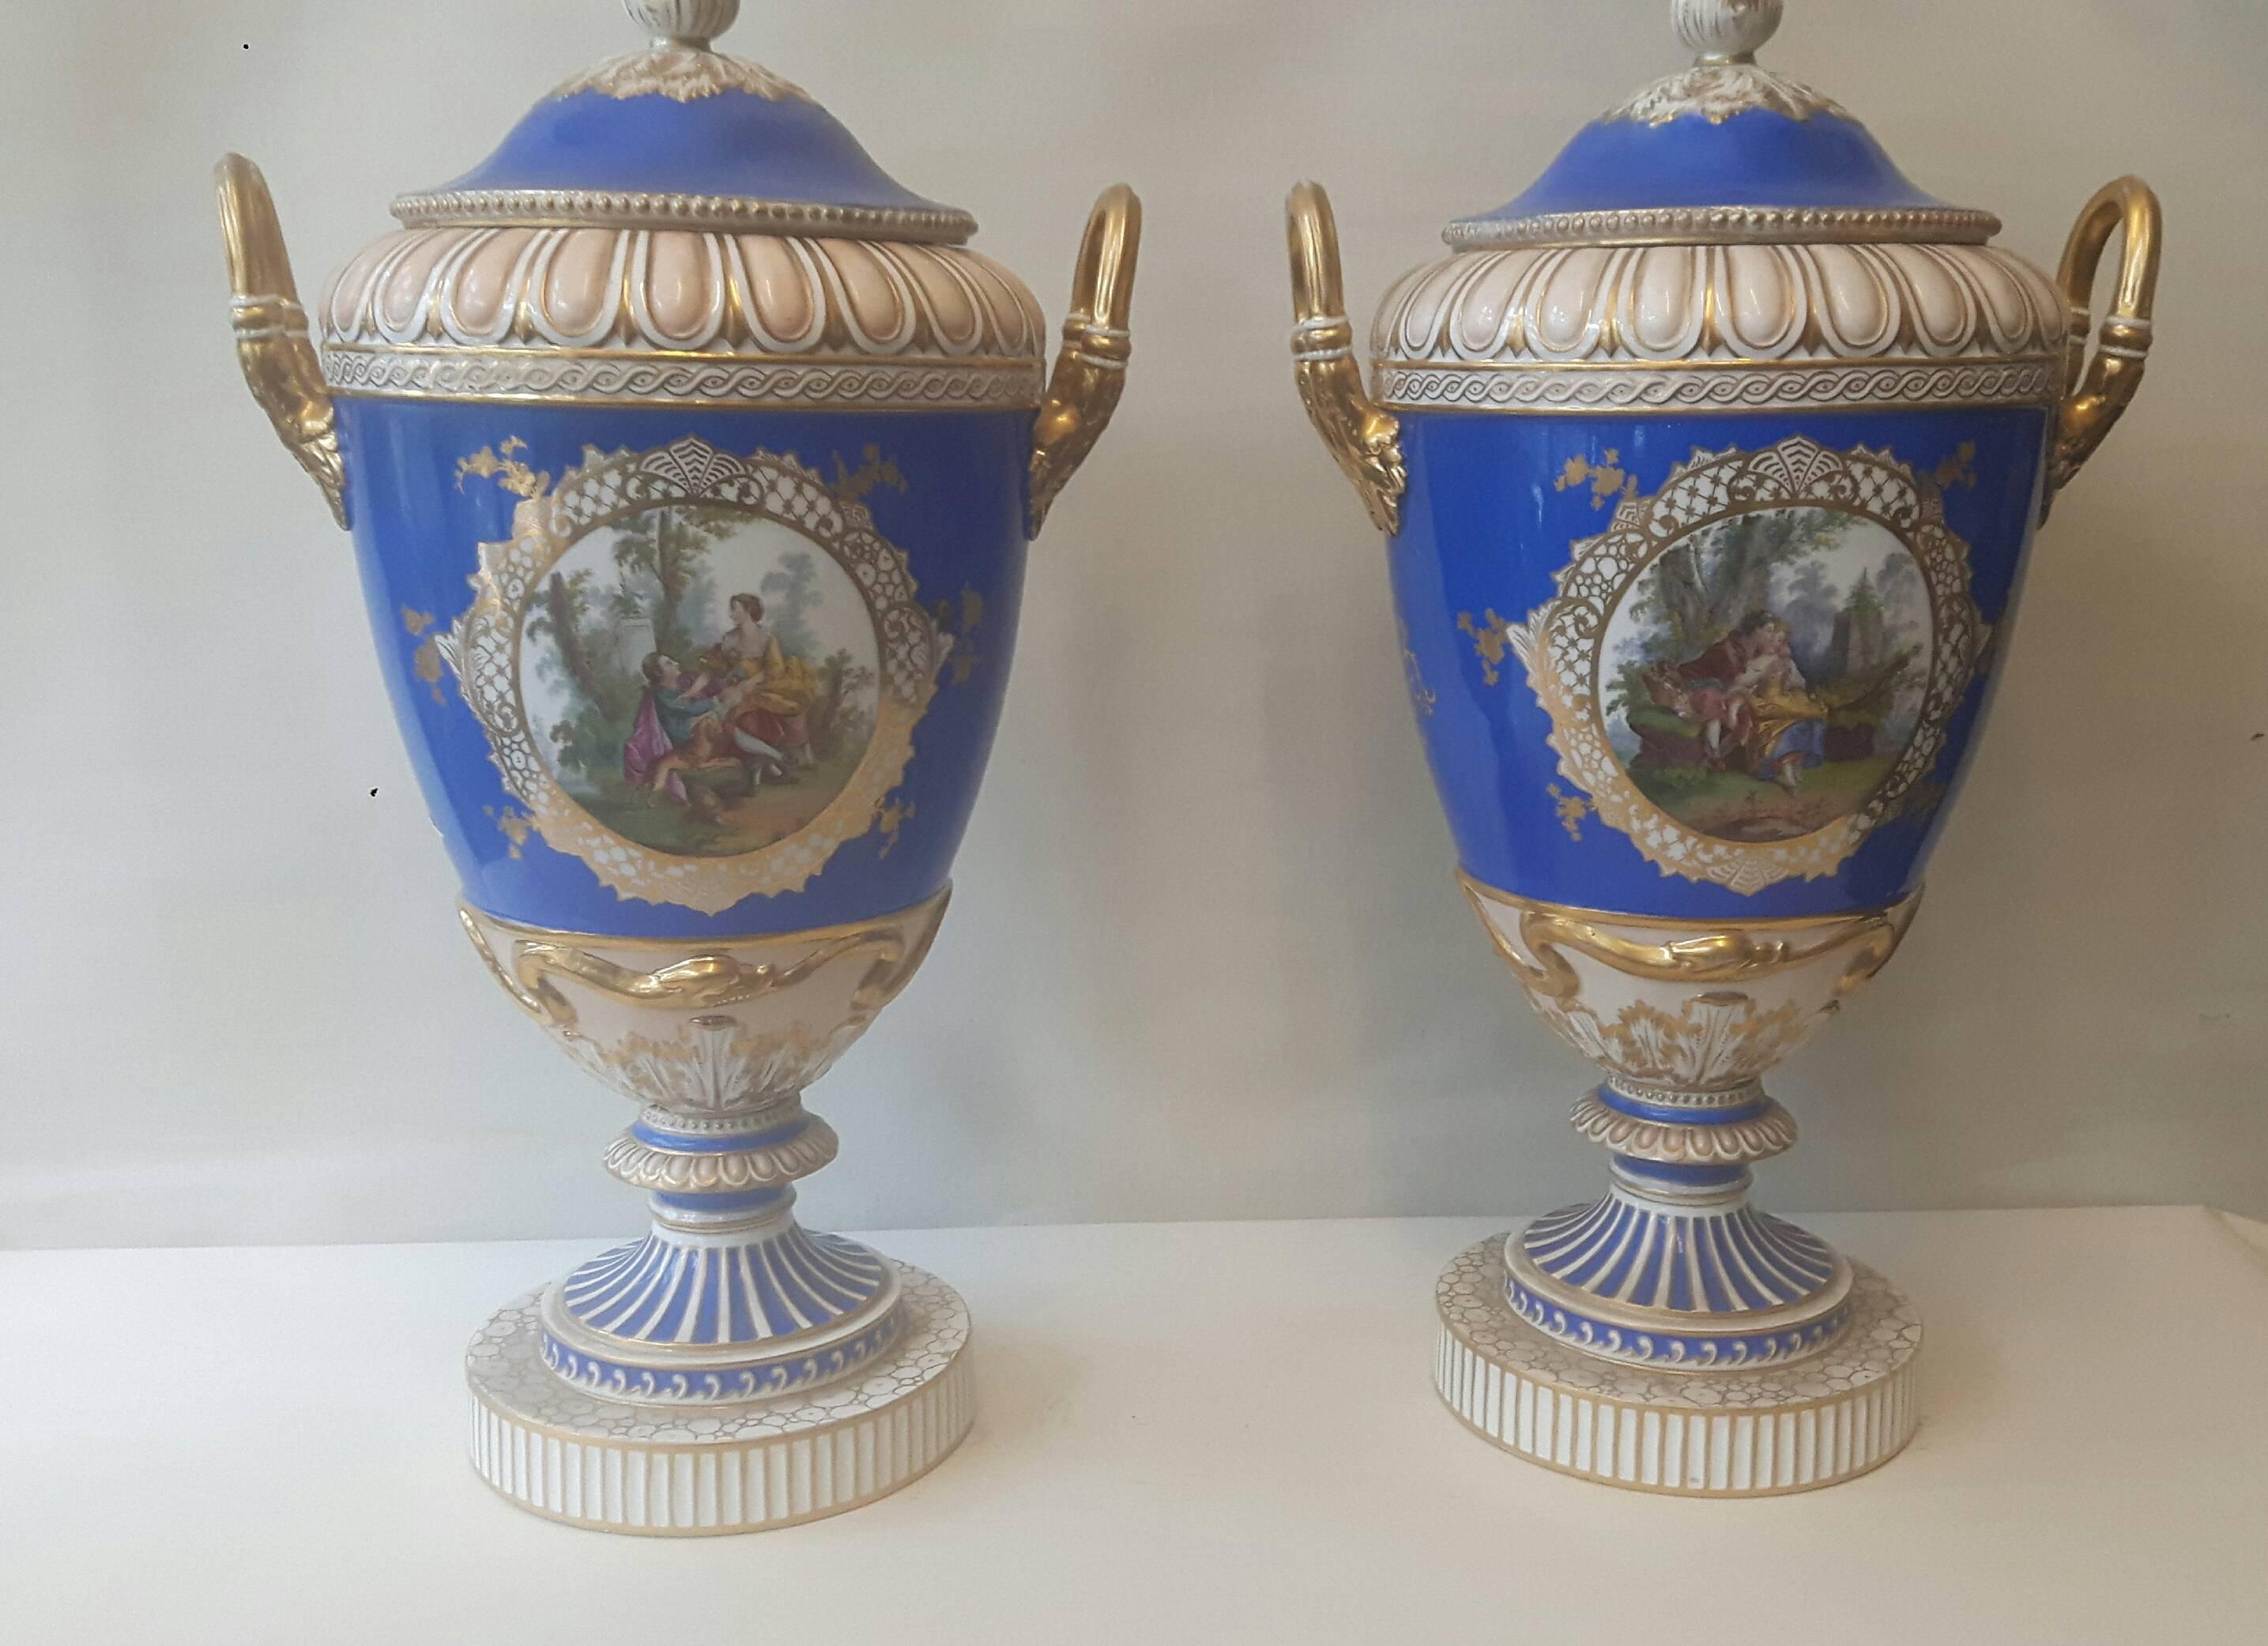 A large pair of Berlin porcelain urn-shaped vases and lids circa 1880, on a royal blue background, with hand-painted cartouches of pastoral scenes after Watteau.